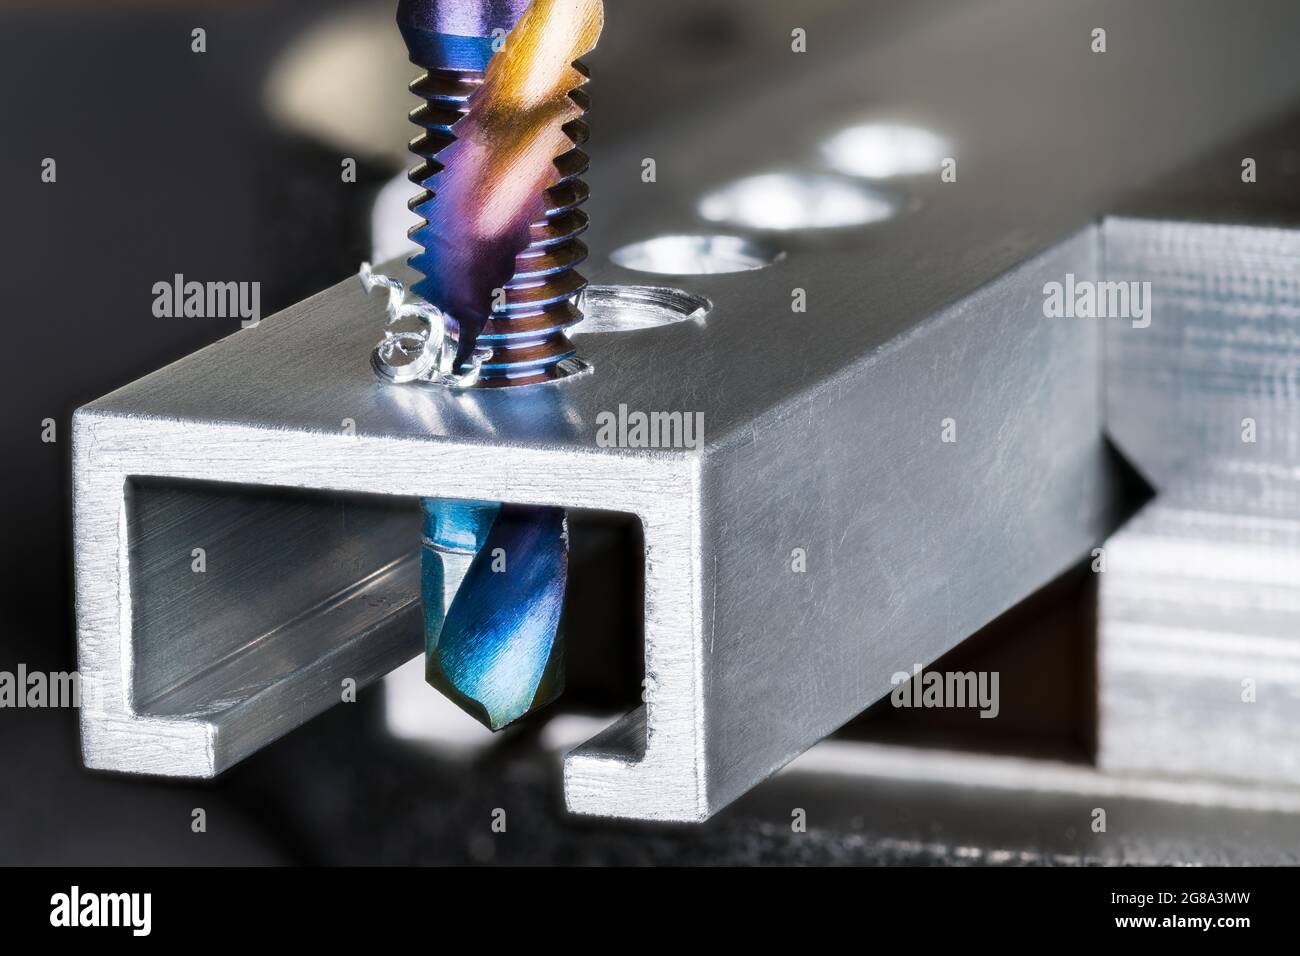 Closeup of tap and drill bit making a threaded hole in an aluminum profile with metal shavings. Professional drilling and tapping tool. Chip machining. Stock Photo